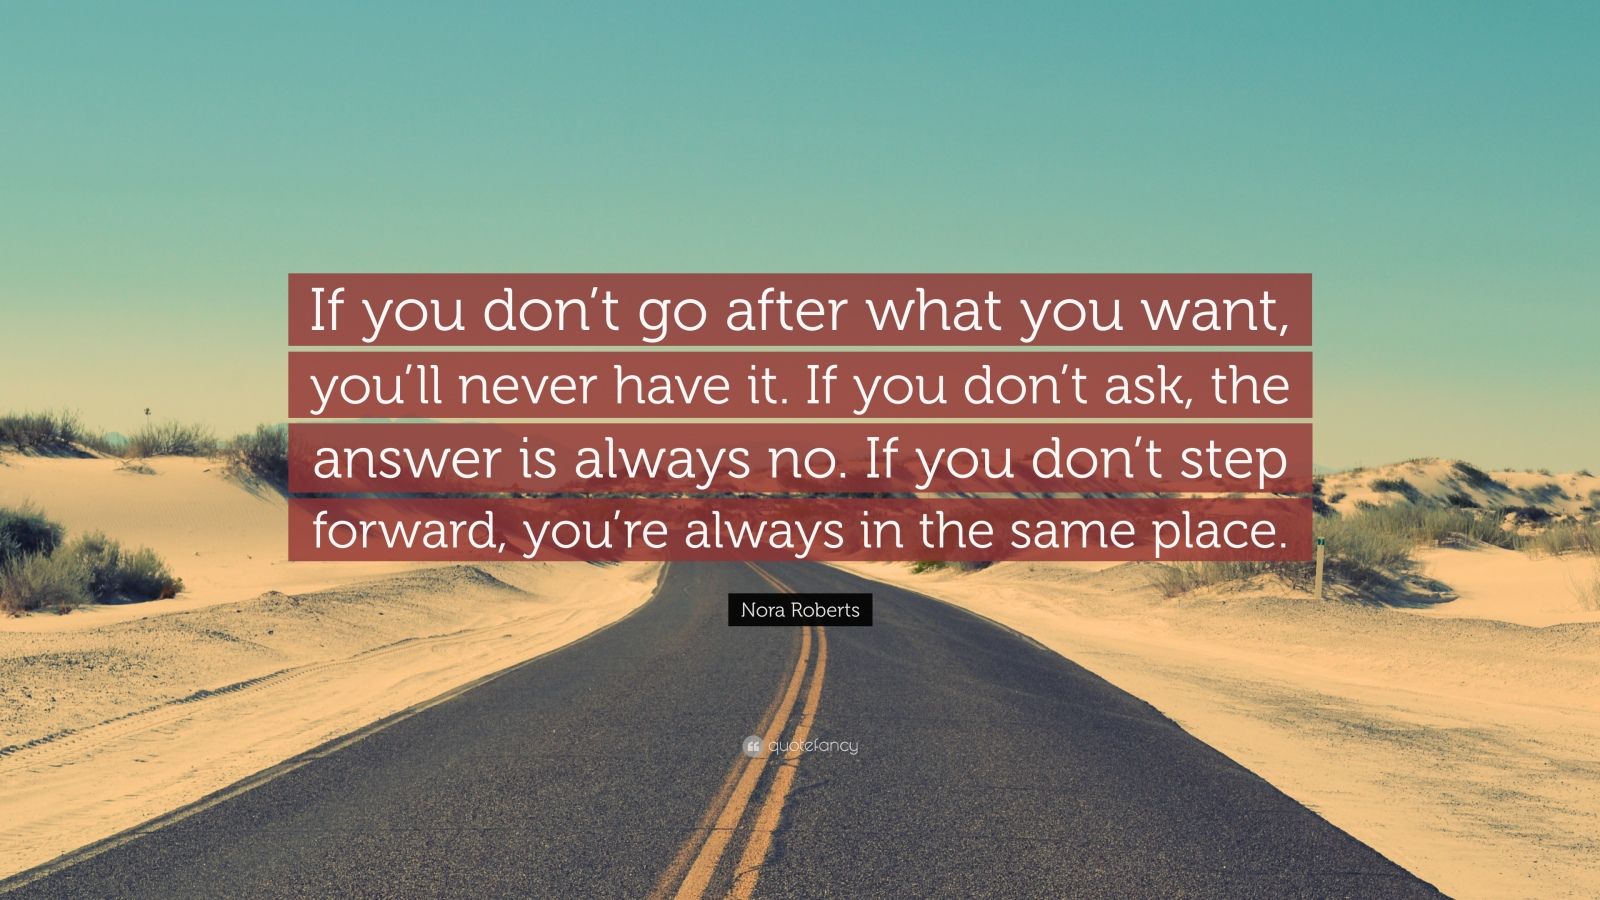 Nora Roberts Quote: “If you don’t go after what you want, you’ll never